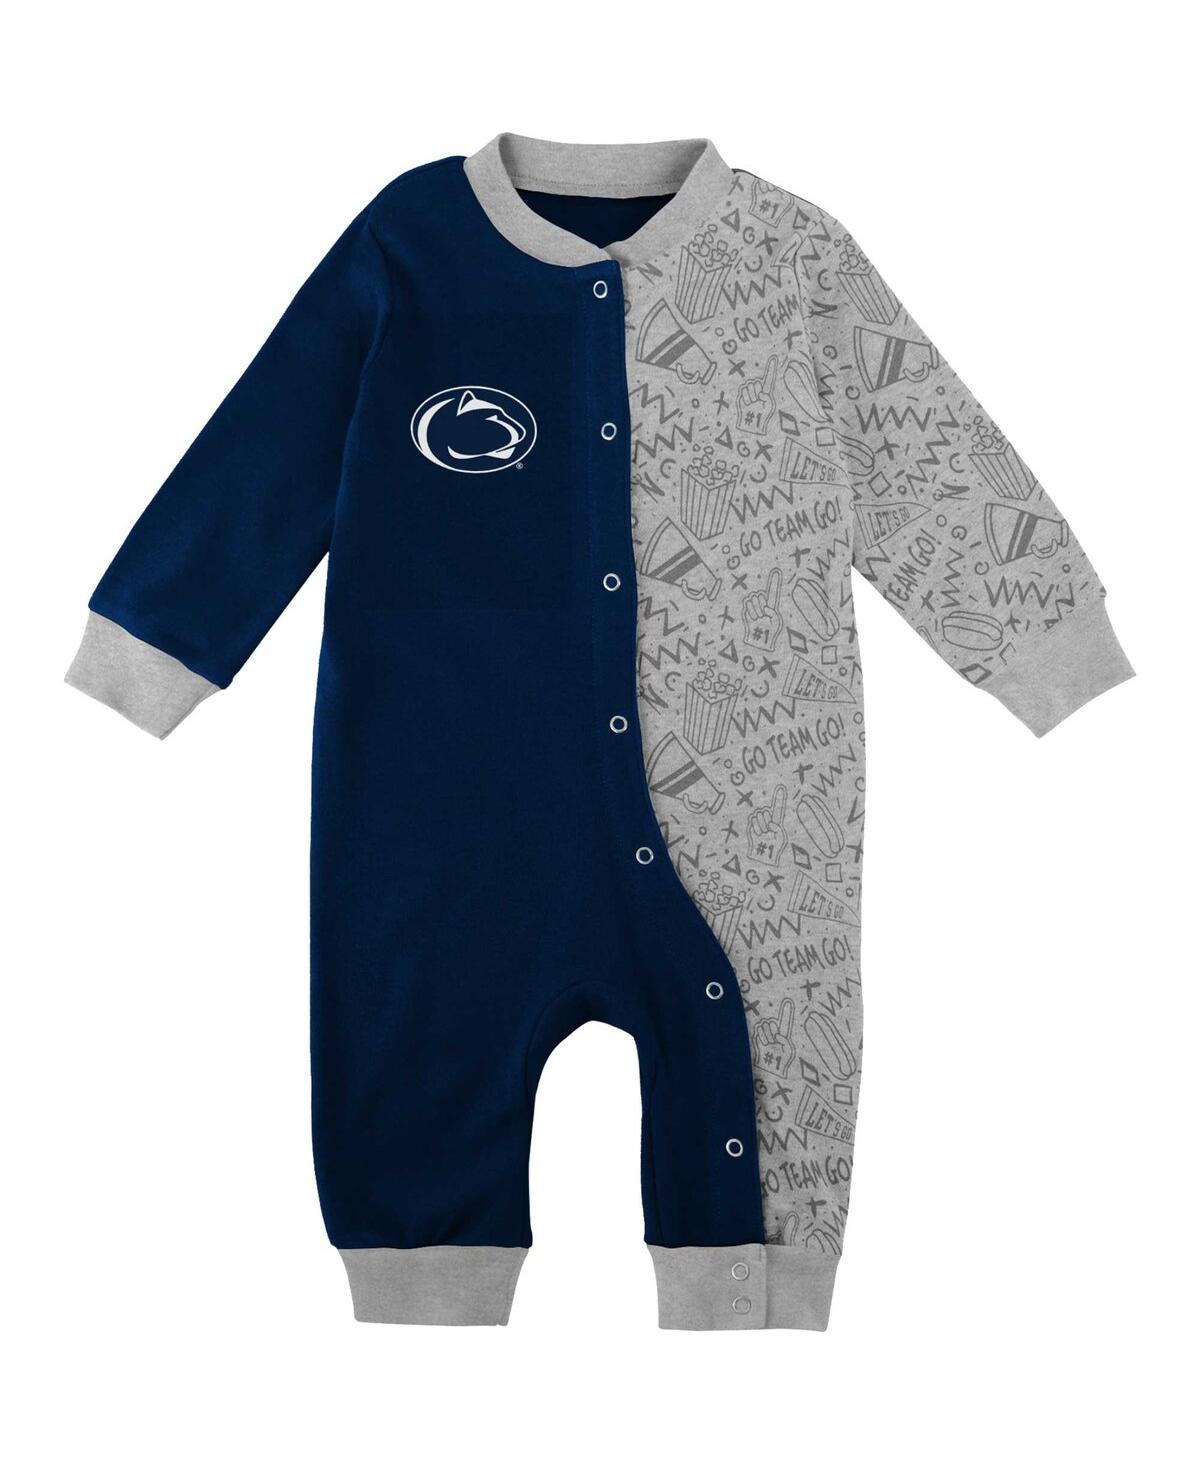 Shop Outerstuff Infant Boys And Girls Navy Penn State Nittany Lions Playbook Two-tone Sleeper